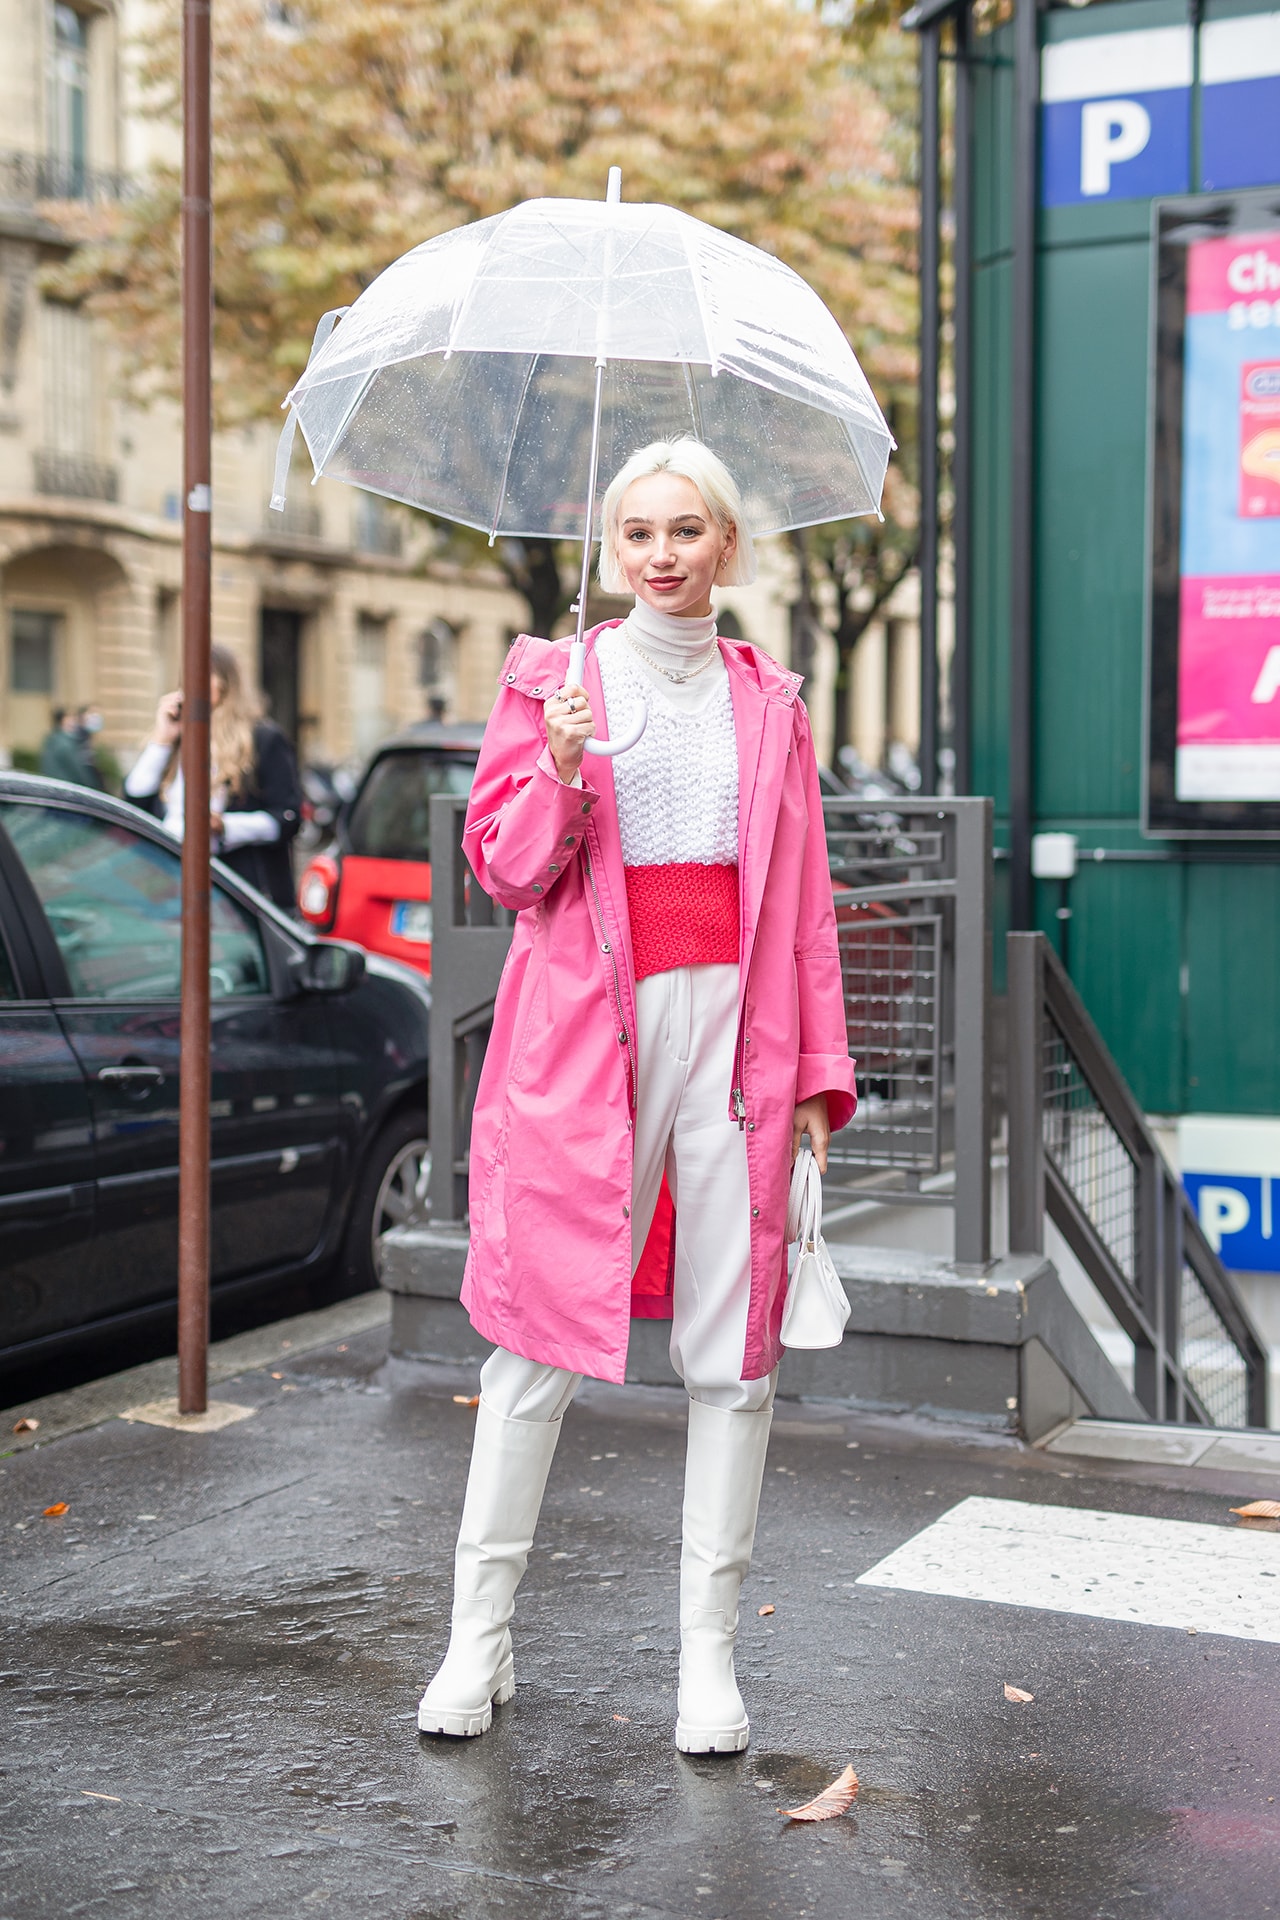 Paris Fashion Week Spring Summer 2022 SS22 Street Style Looks Outfit Influencer